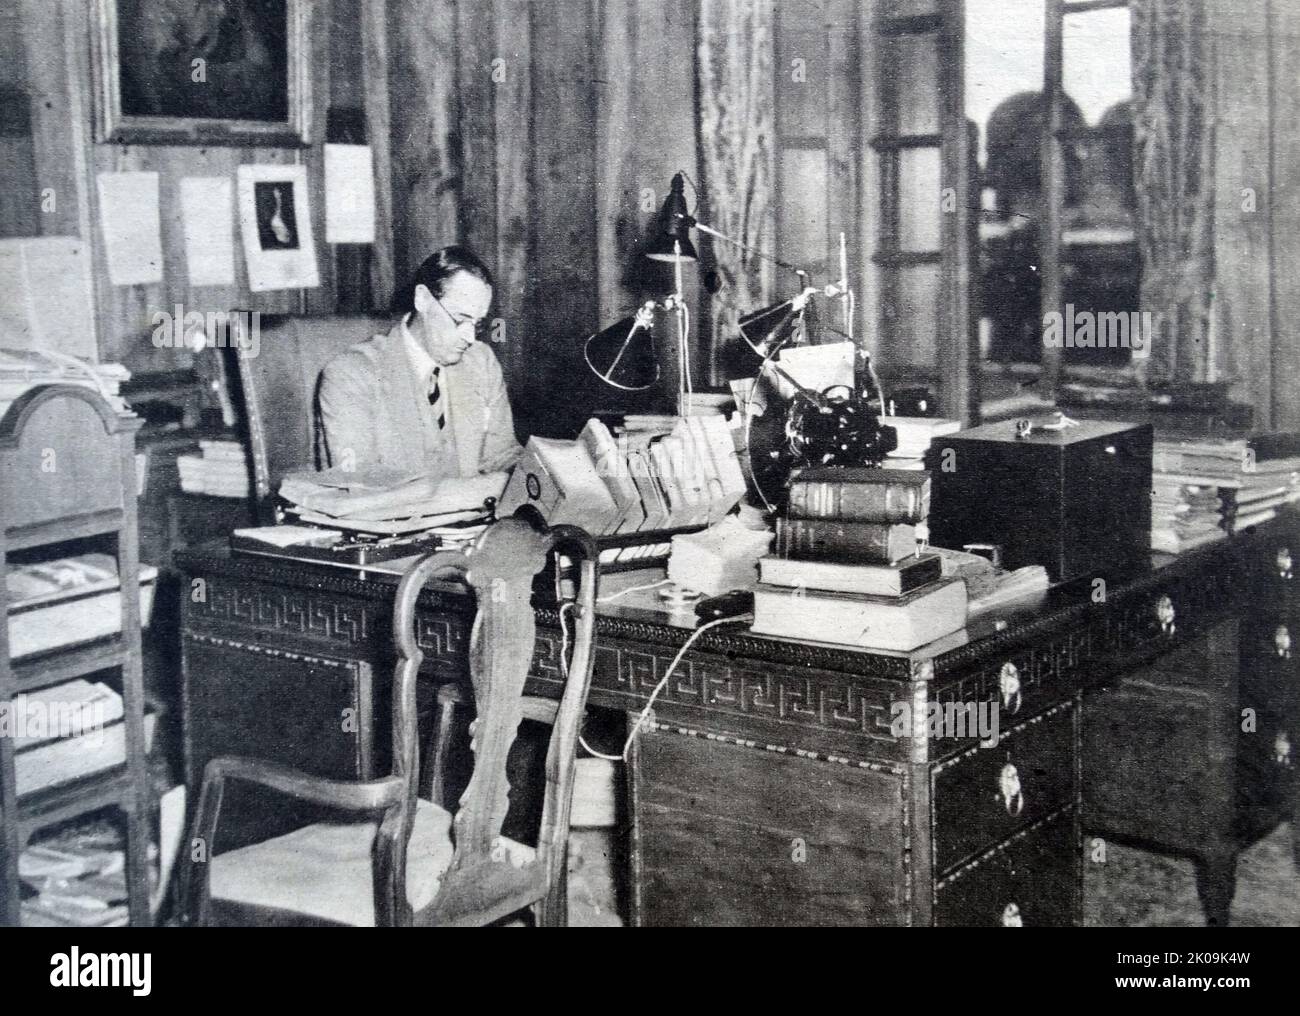 Viceroy of India, Lord Linlithgow at his desk in New Delhi. Victor Alexander John Hope, 2nd Marquess of Linlithgow, KG, KT, GCSI, GCIE, OBE, TD, PC, FRSE (24 September 1887 - 5 January 1952) was a British Unionist politician, agriculturalist, and colonial administrator. He served as Governor-General and Viceroy of India from 1936 to 1943. He was usually referred to simply as Linlithgow. Stock Photo